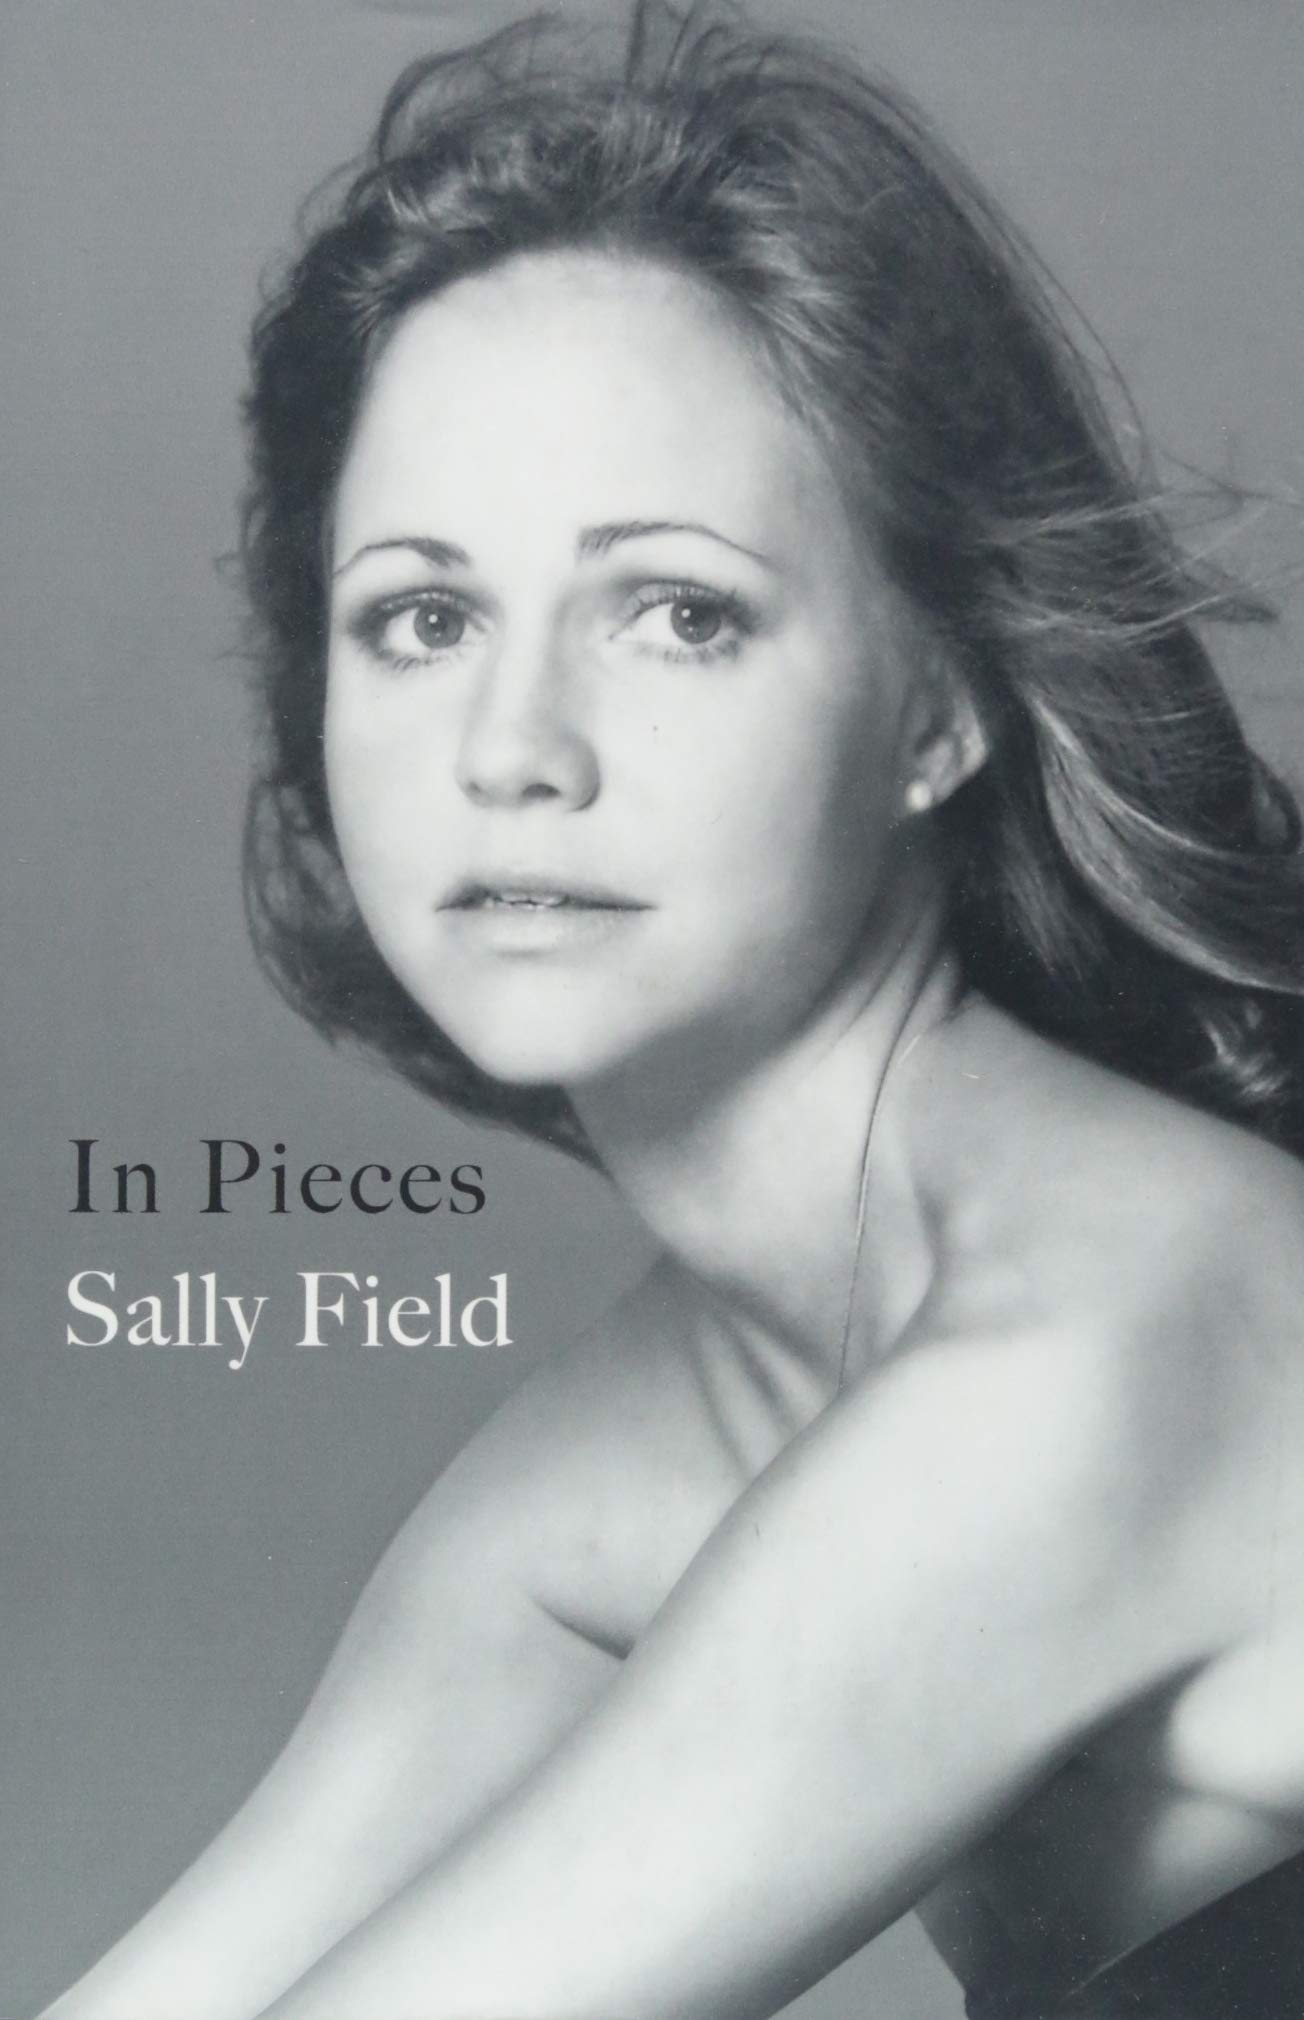 In Pieces, by Sally Field - A Review